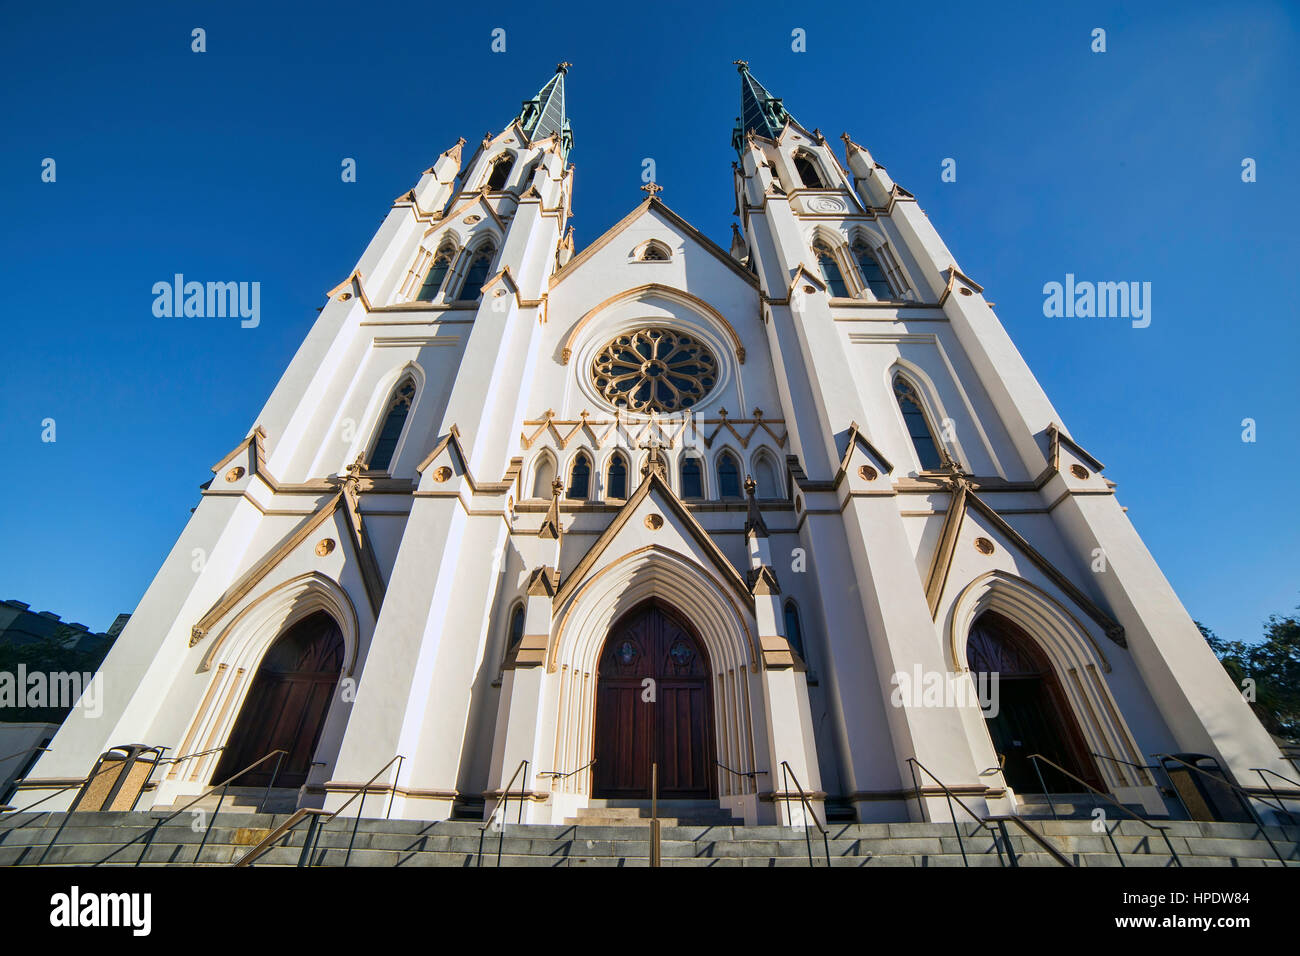 Wide angle perspective shot of St. John the Baptist cathedral in Savannah, Georgia. Stock Photo